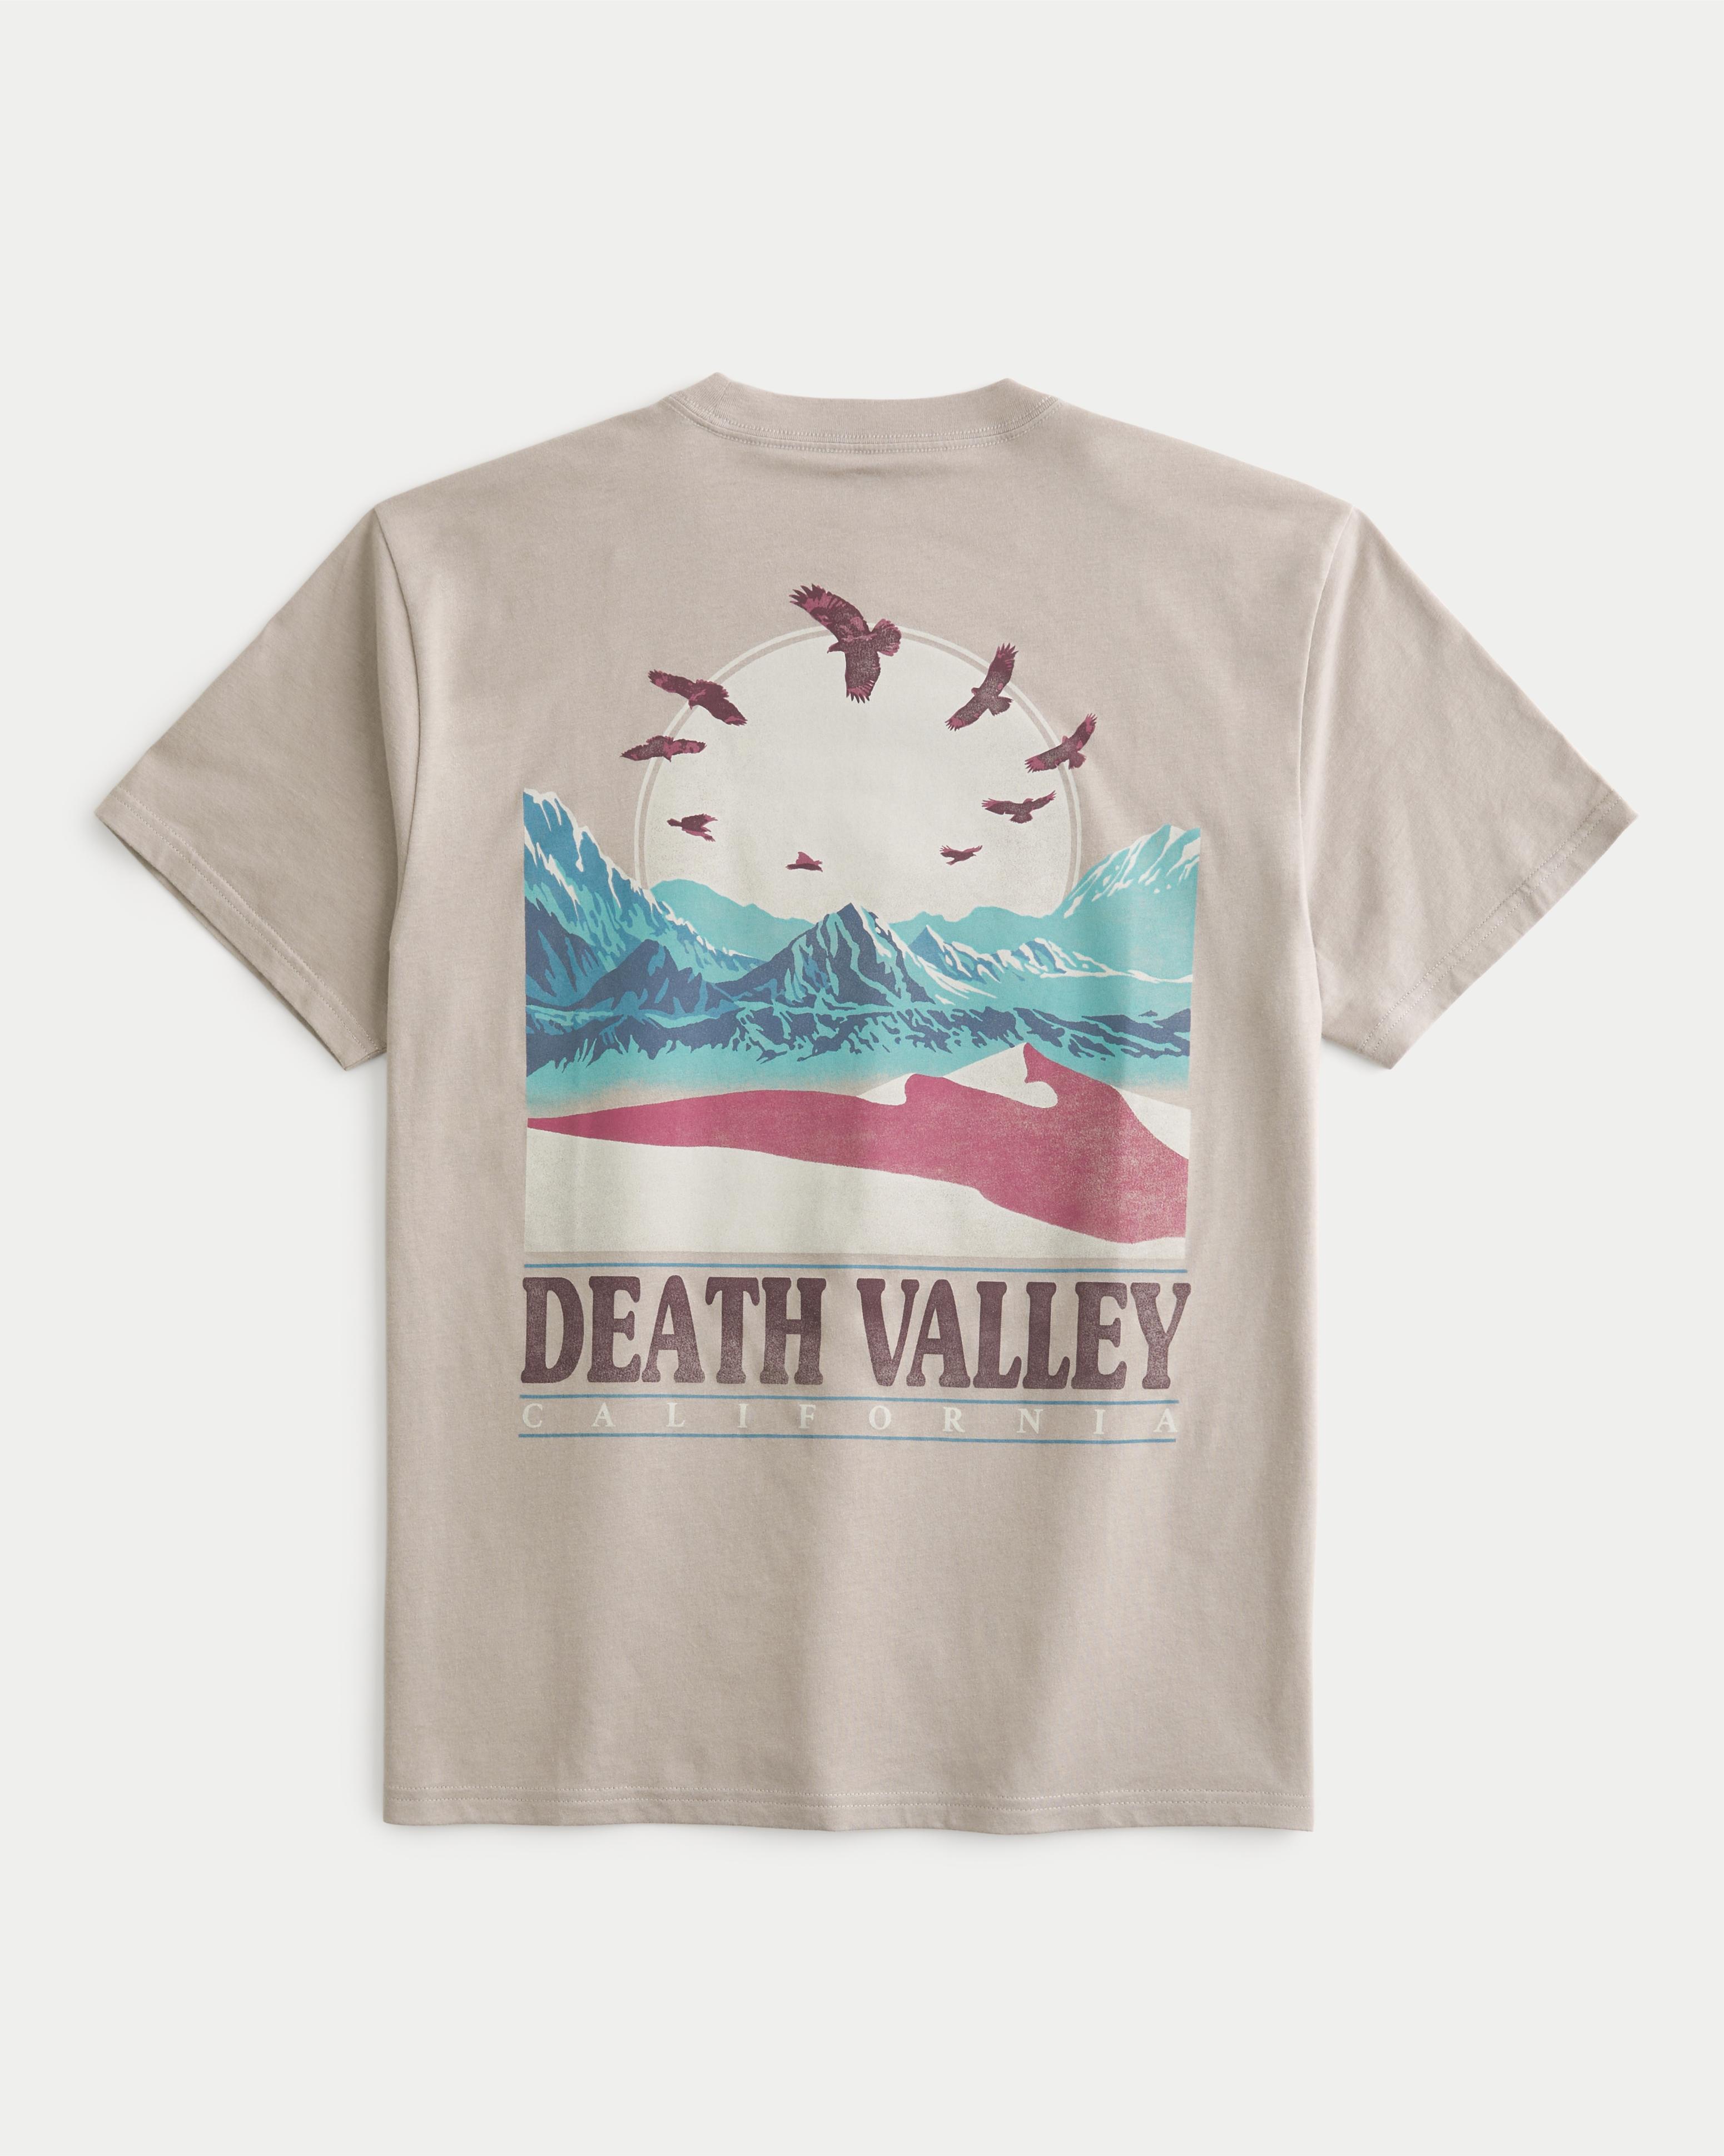 Hollister Relaxed National Park Graphic Tee